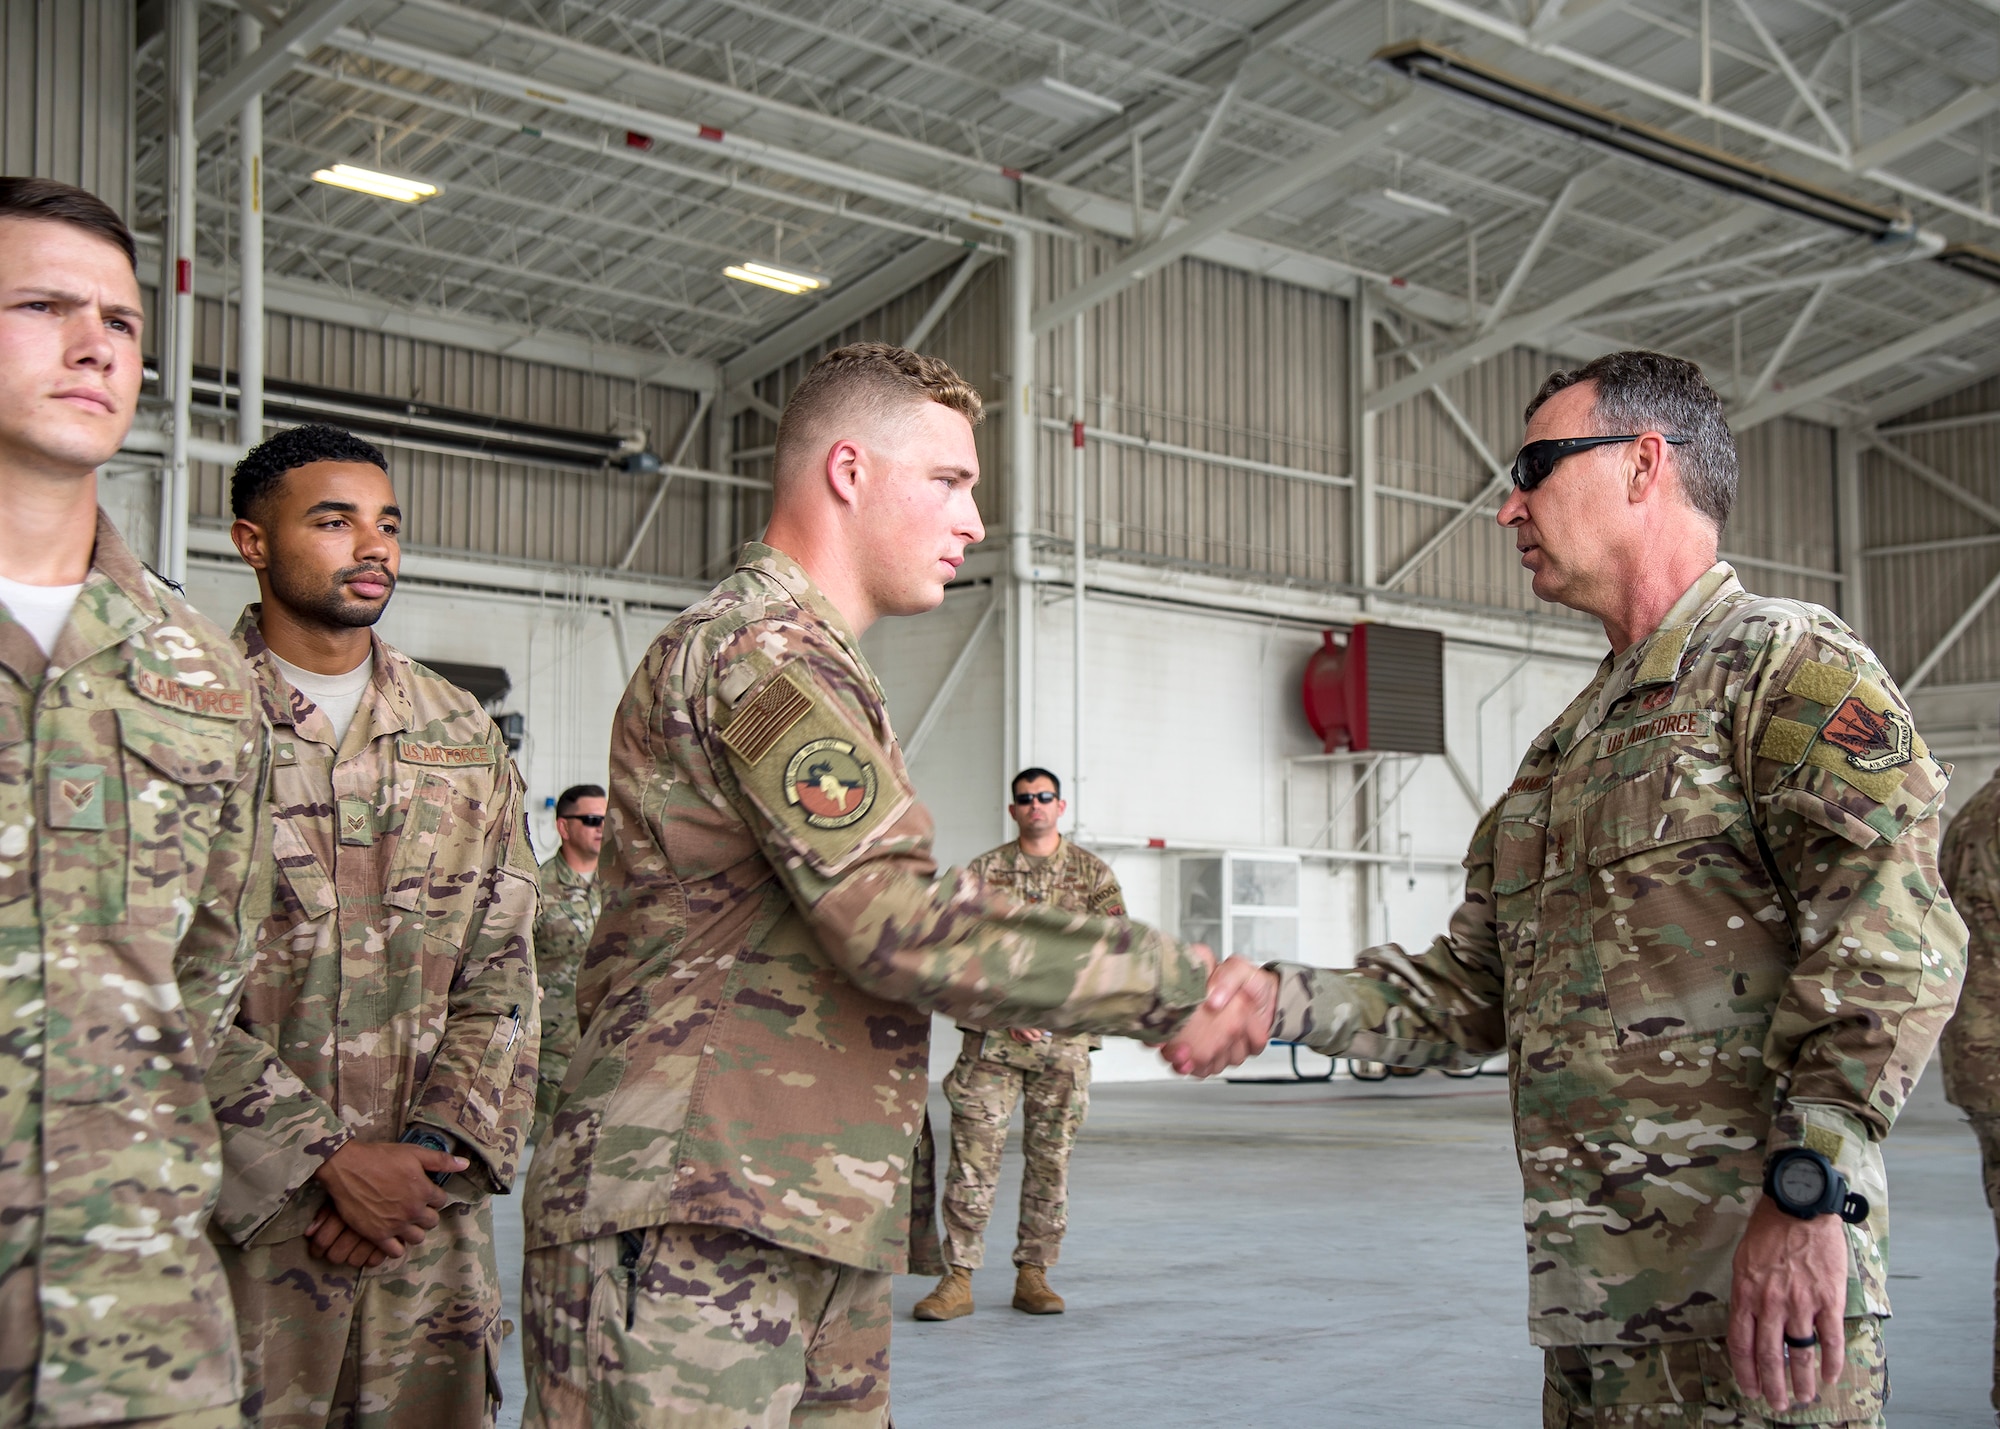 Maj. General Chad Franks, right, Ninth Air Force commander, coins an Airman from the 820th Base Defense Group Aug. 9, 2019, at Moody Air Force Base, Ga. Franks, who on separate occasions served as the commander for the 23d Wing and 347th Rescue Group, is a command pilot with more than 3,300 hours in multiple aircraft including HC-130J Combat King II and HH-60G Pave Hawk. (U.S. Air Force photo by Airman 1st Class Eugene Oliver)